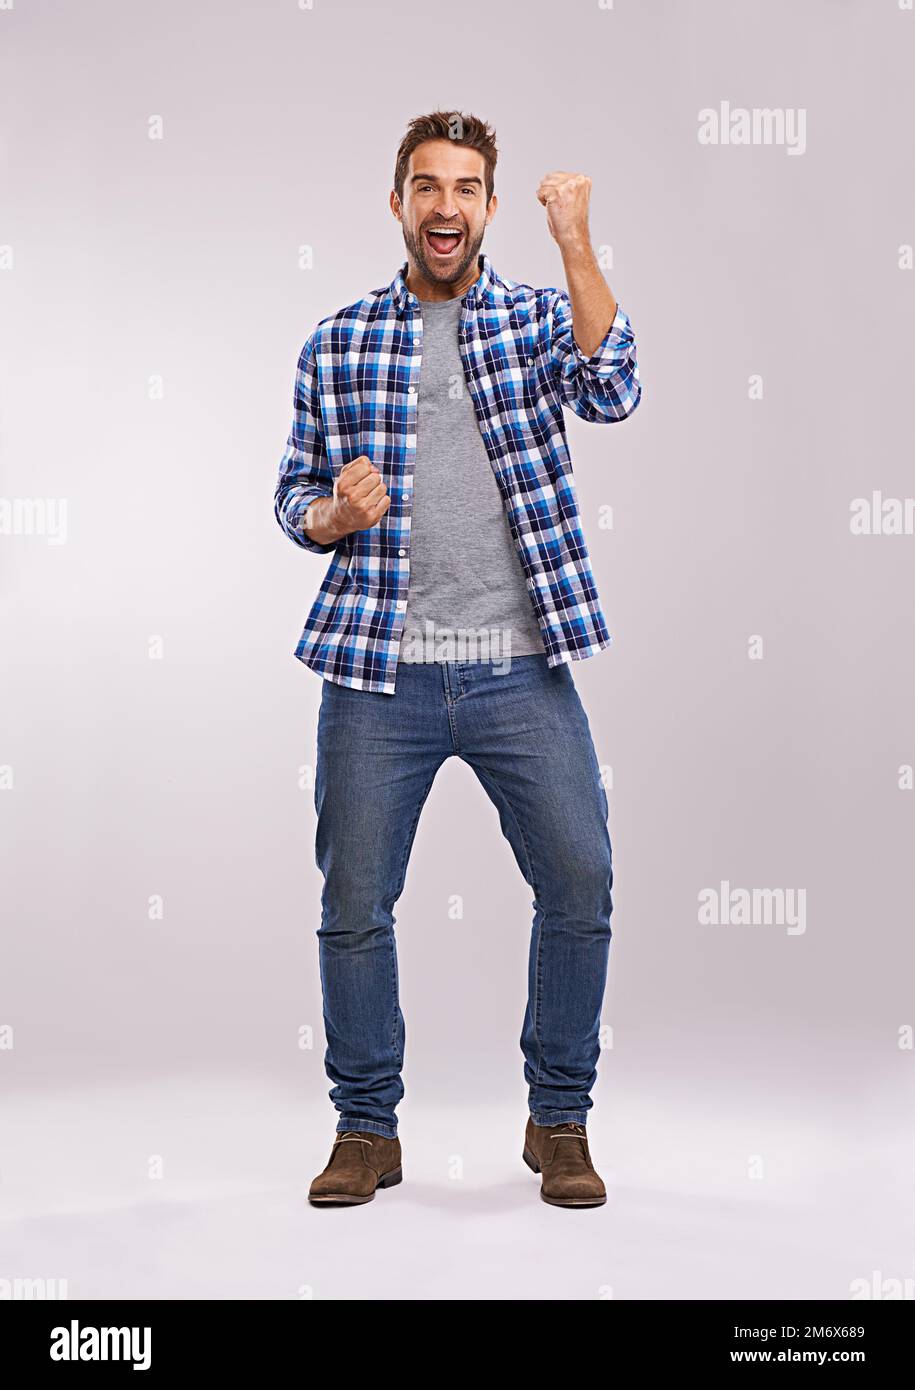 Yes. Studio shot of an enthusiastic and handsome man against a gray background. Stock Photo